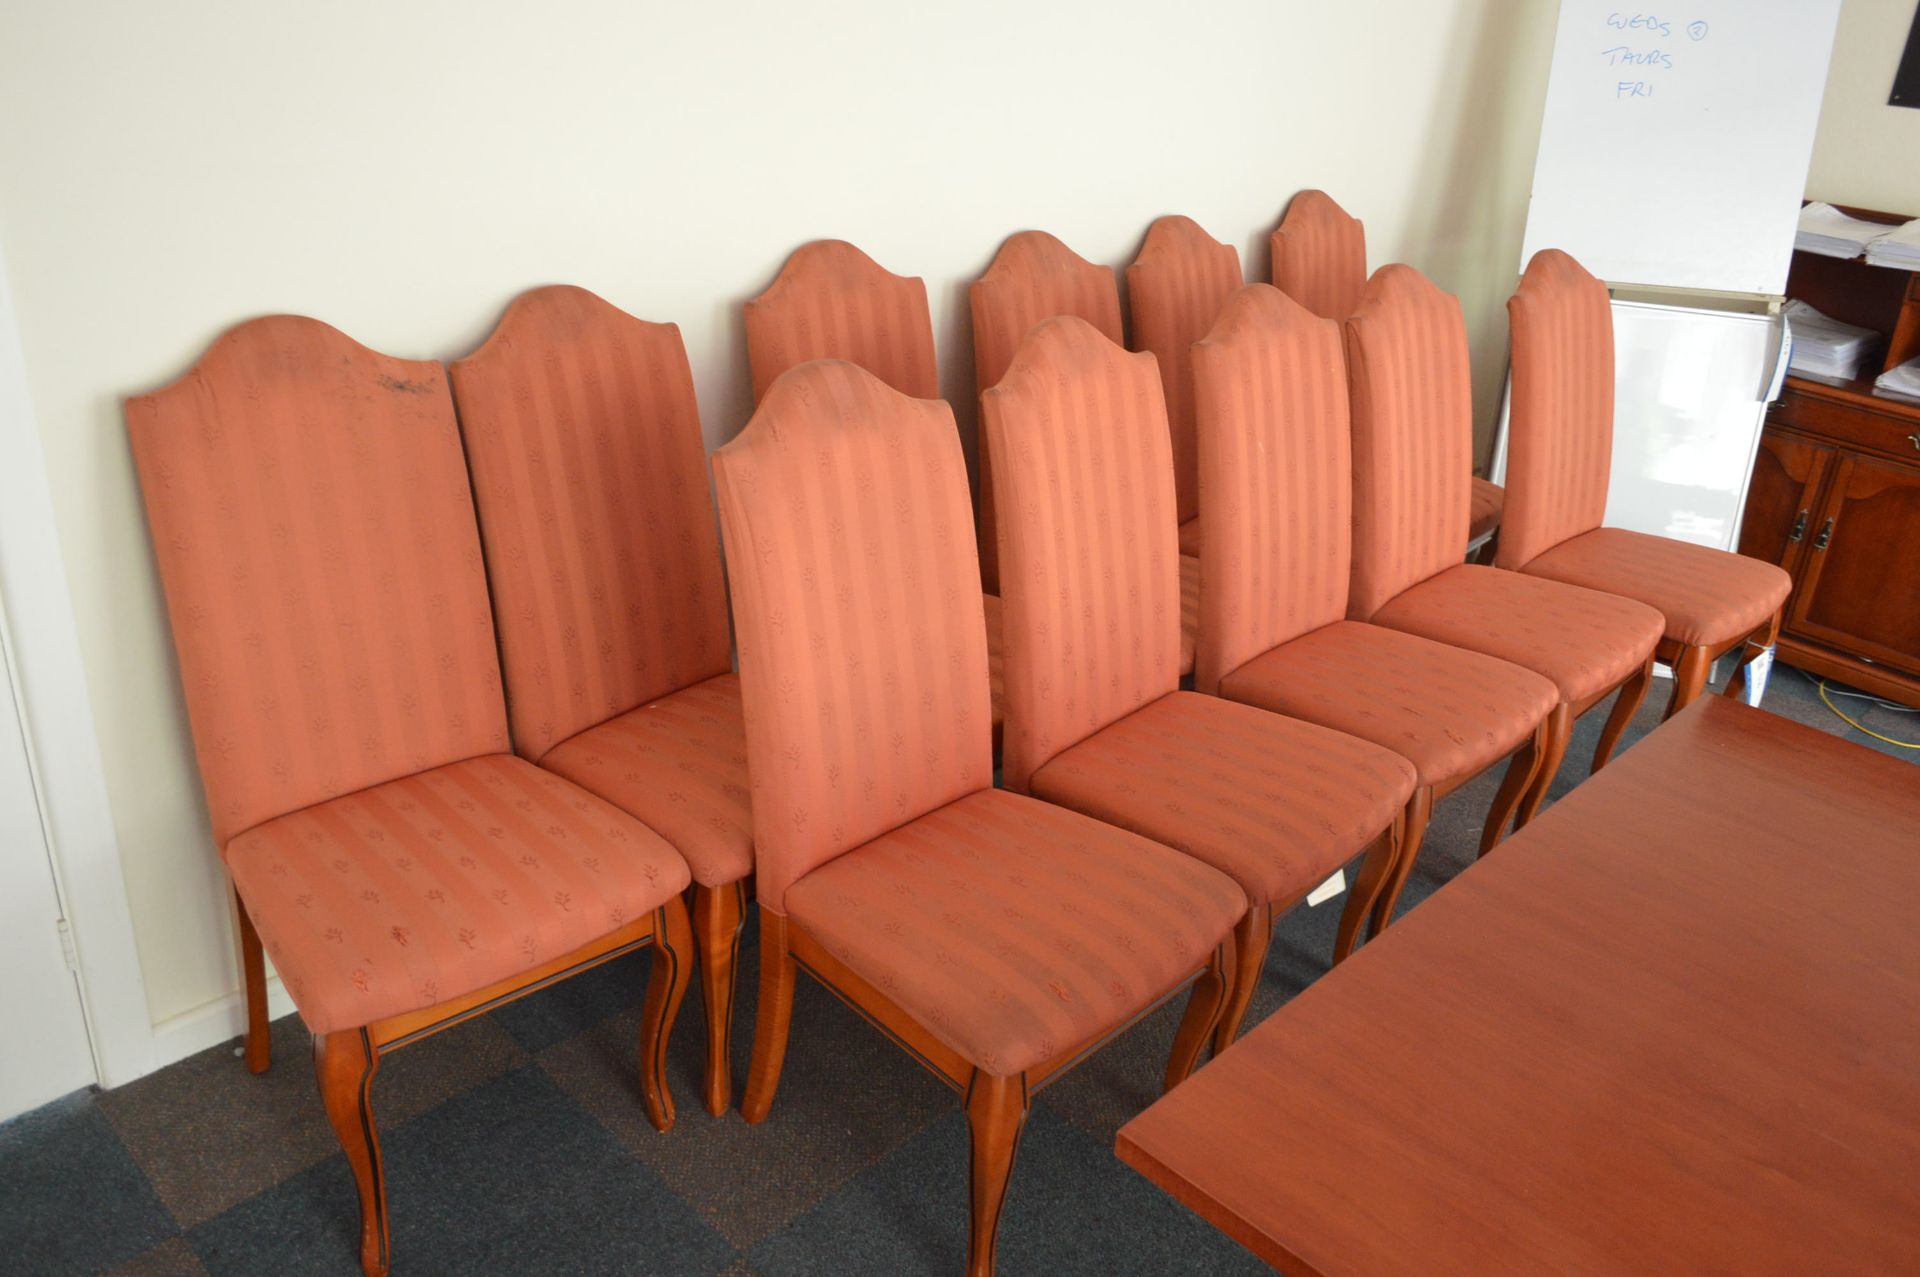 11 Fabric Upholstered Wood Frame Stand Chairs - Image 2 of 2